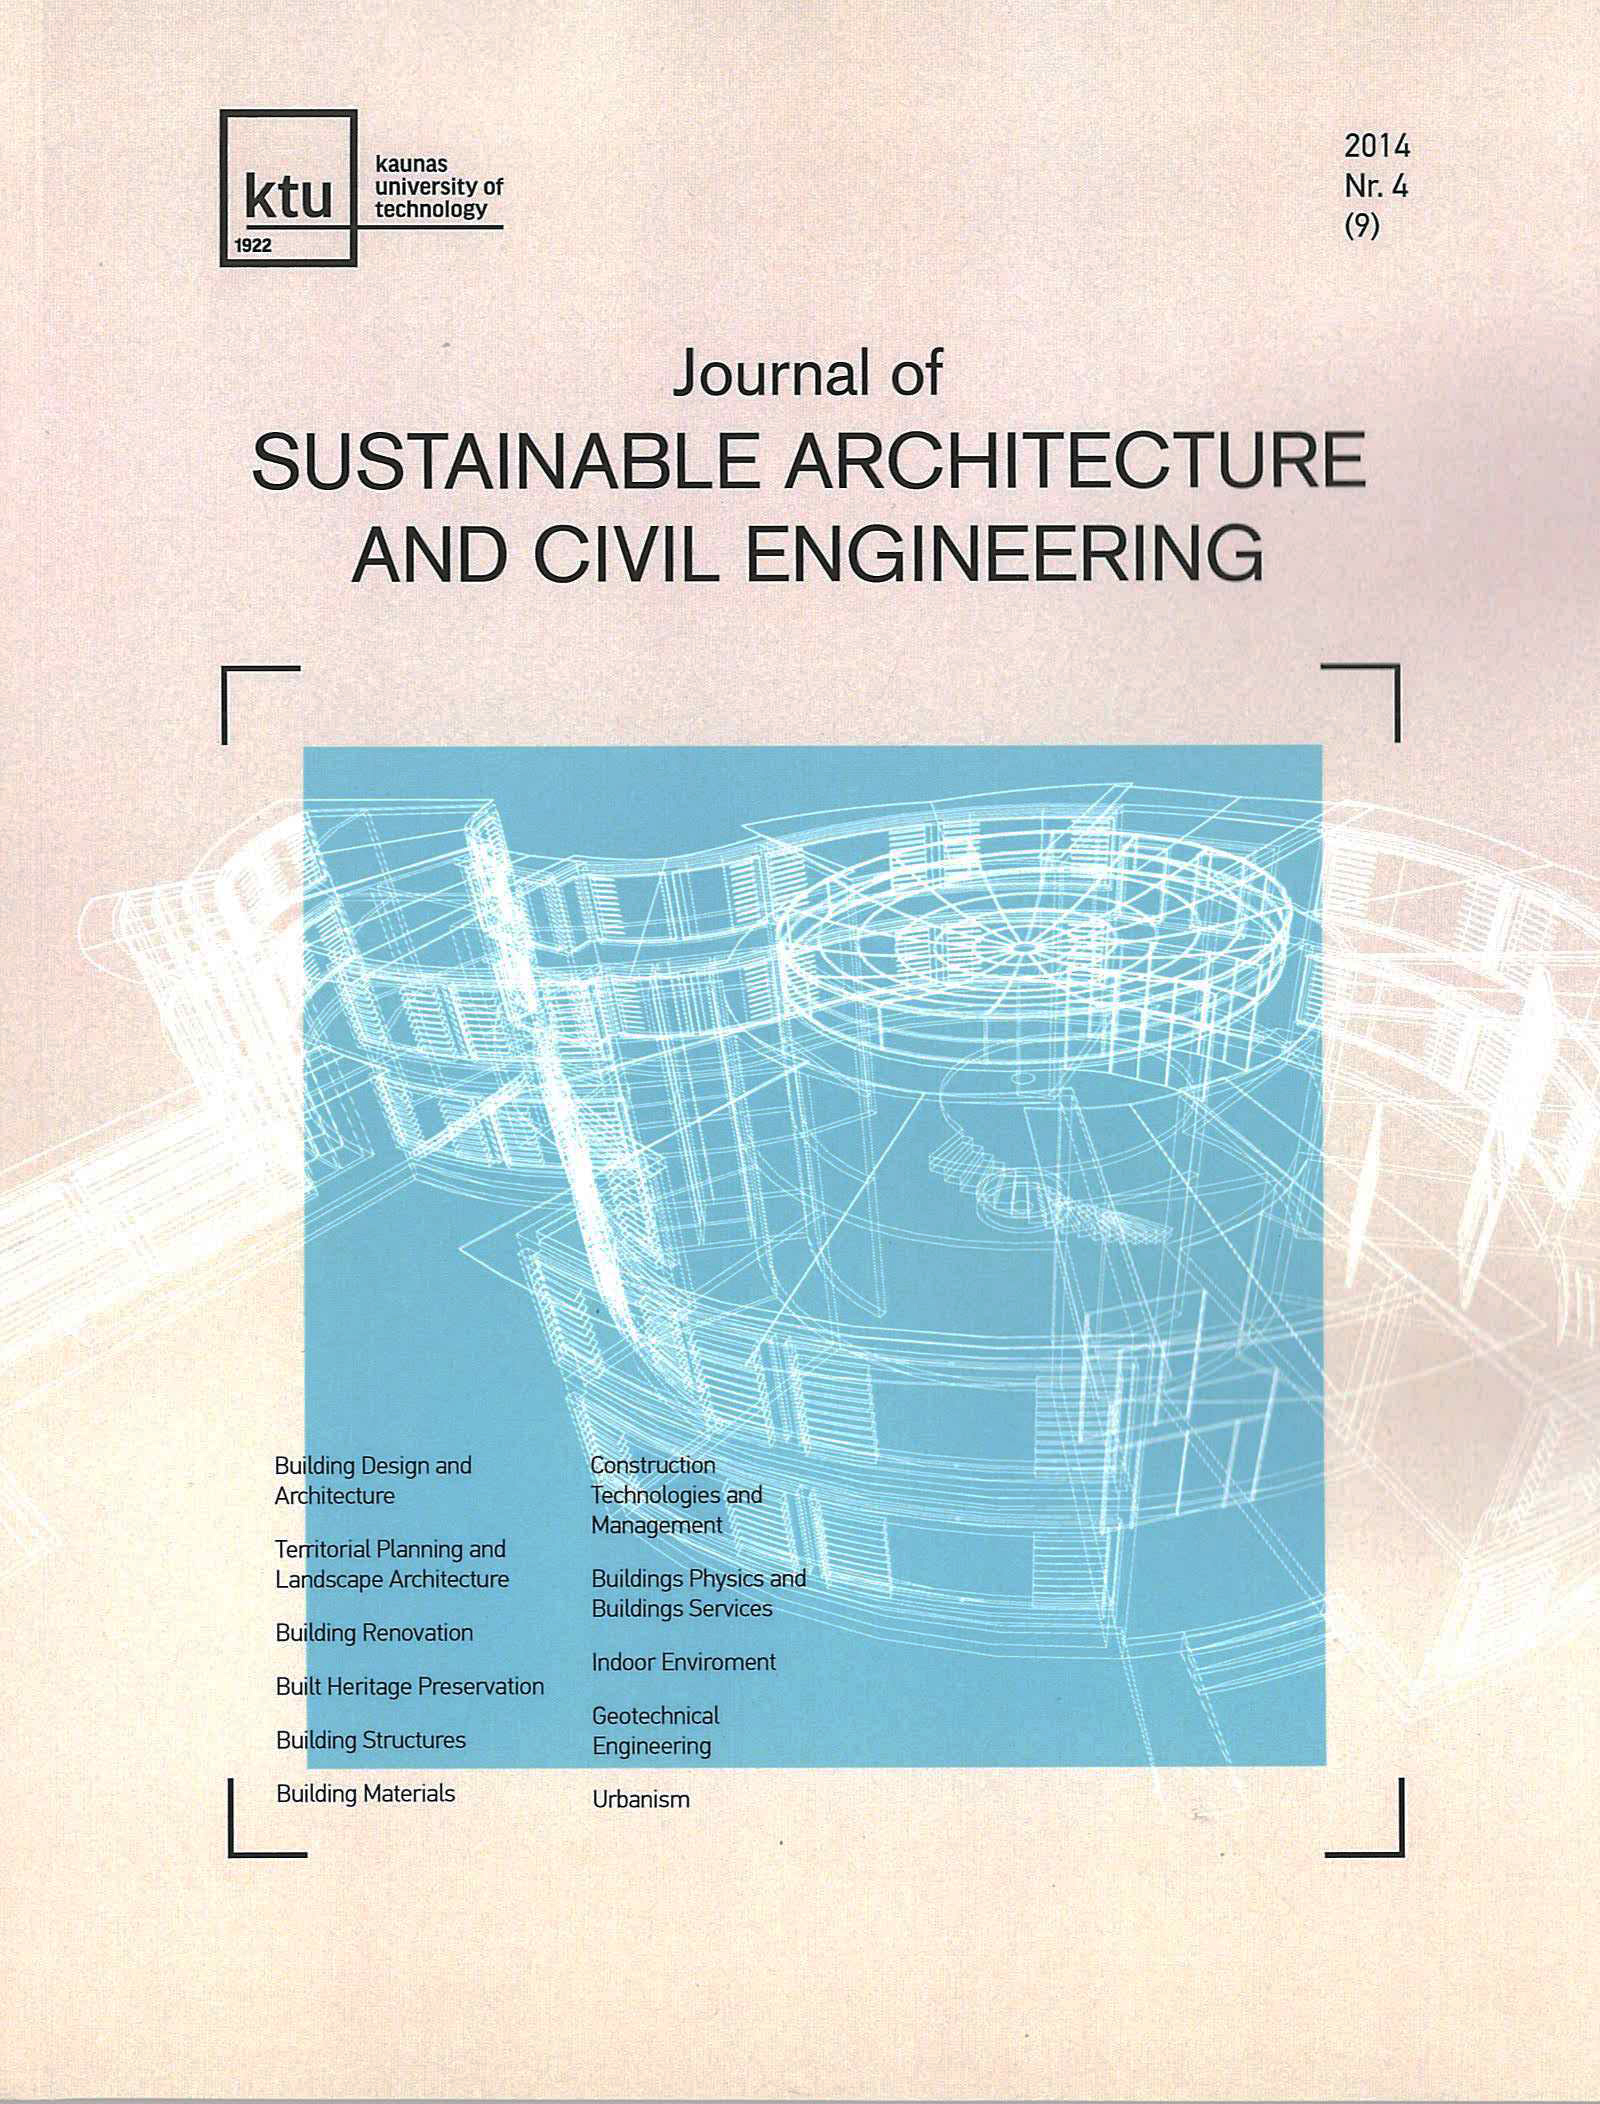 Journal of Sustainable Architecture and Civil Engineering